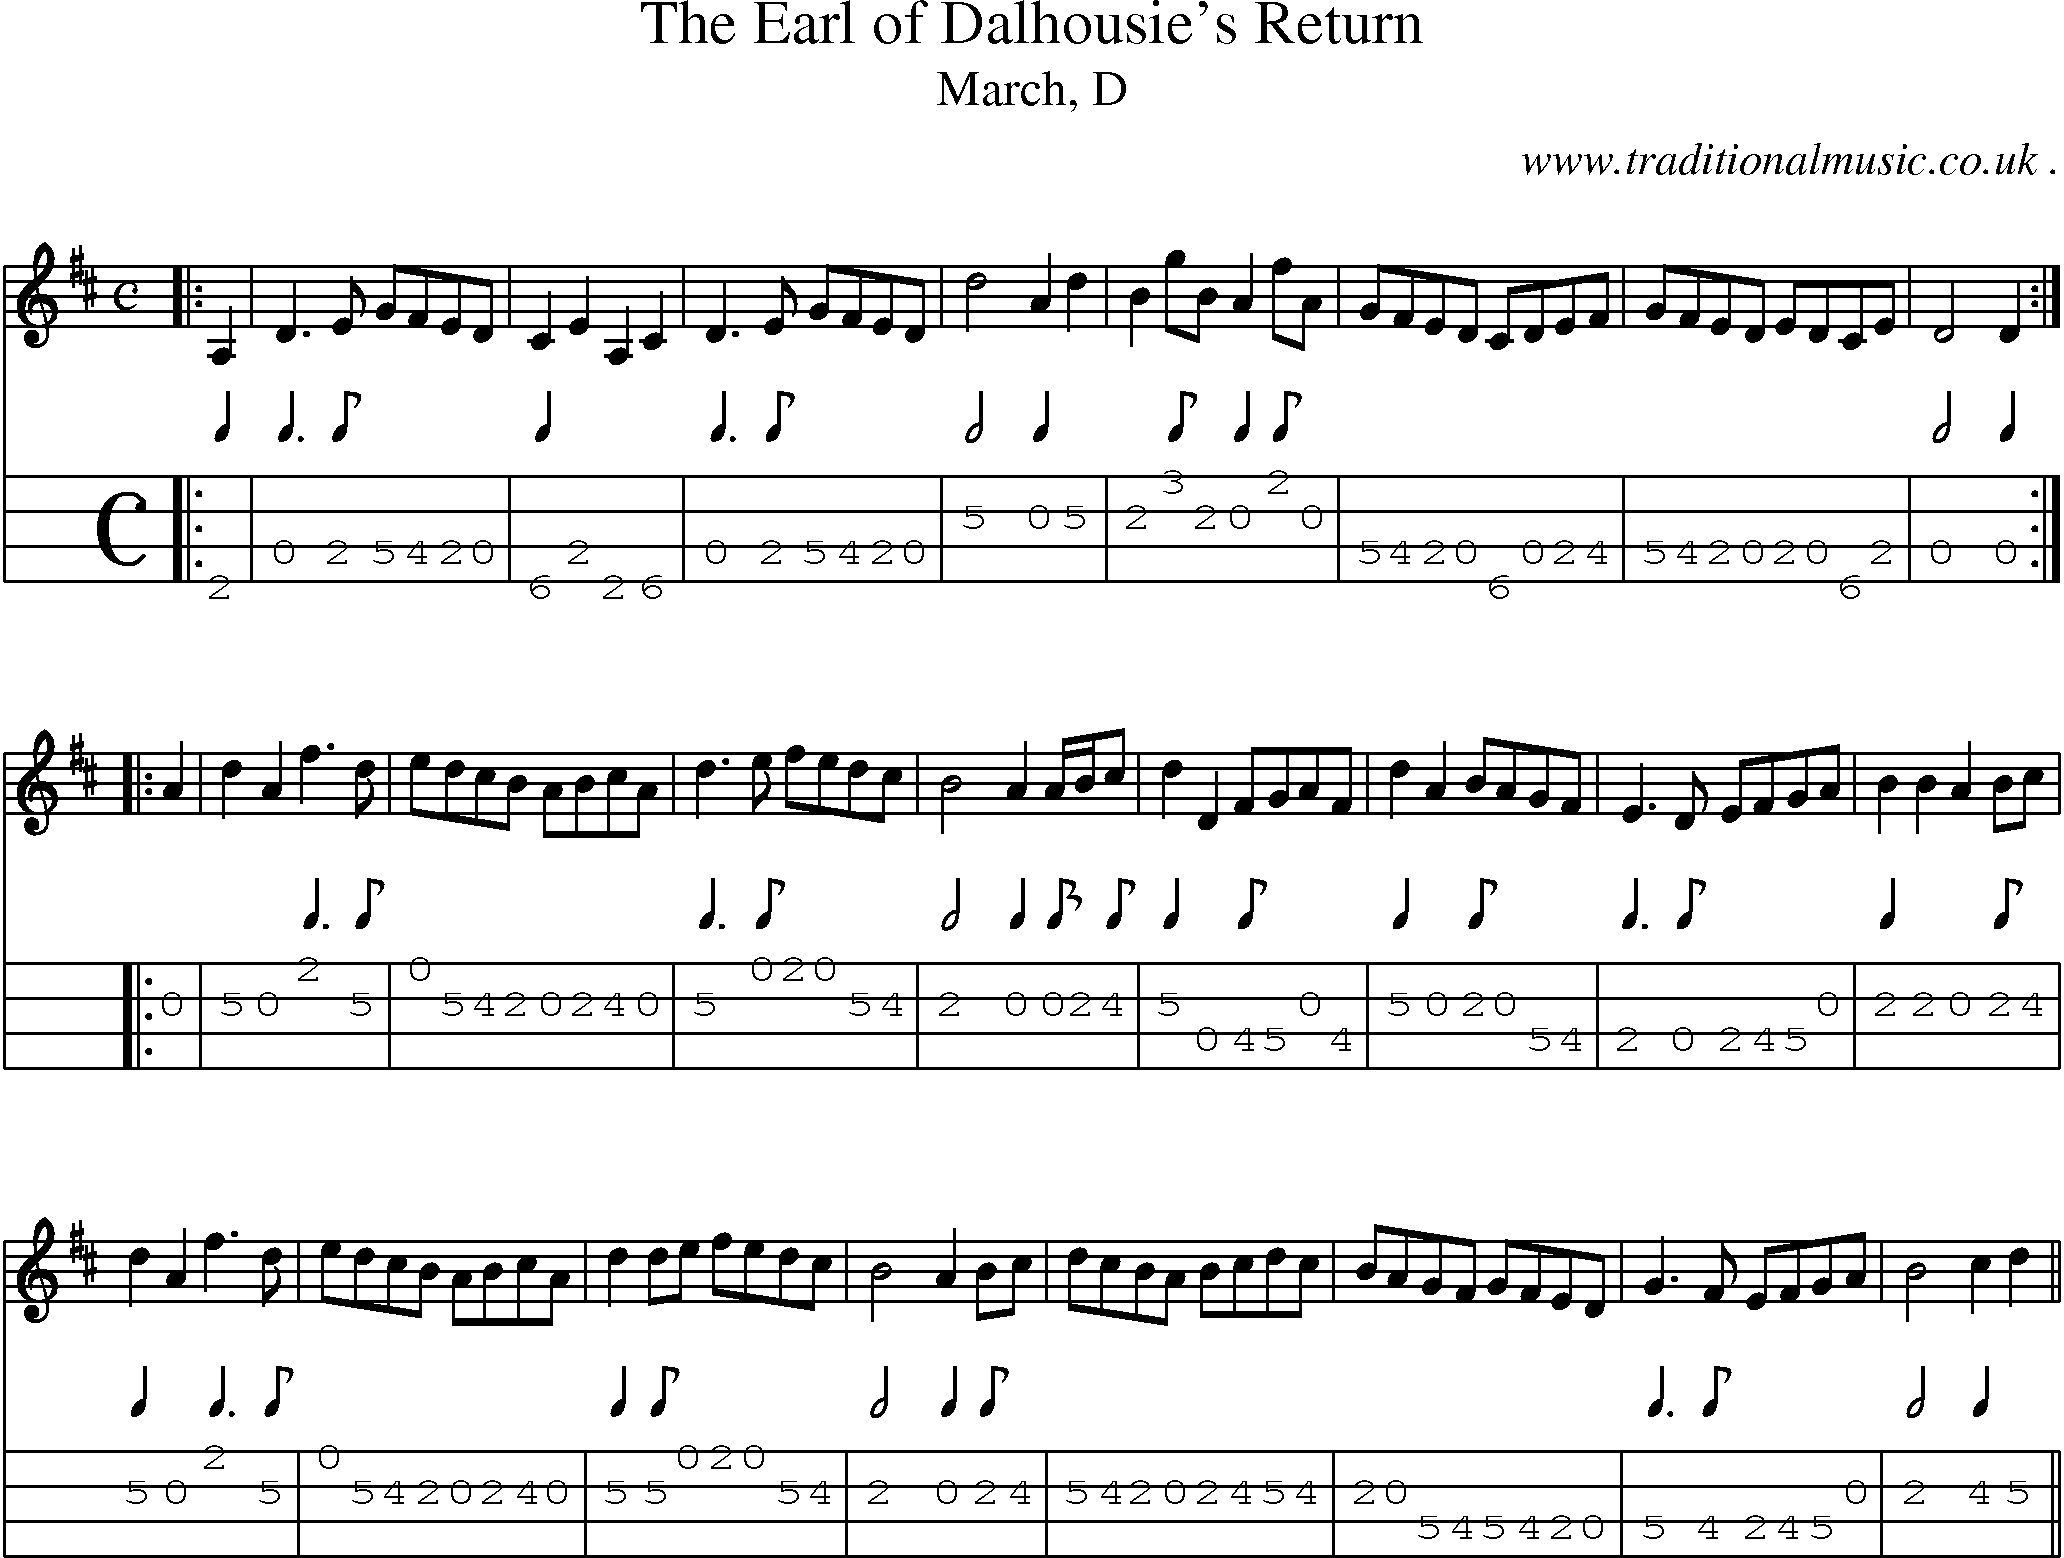 Sheet-music  score, Chords and Mandolin Tabs for The Earl Of Dalhousies Return